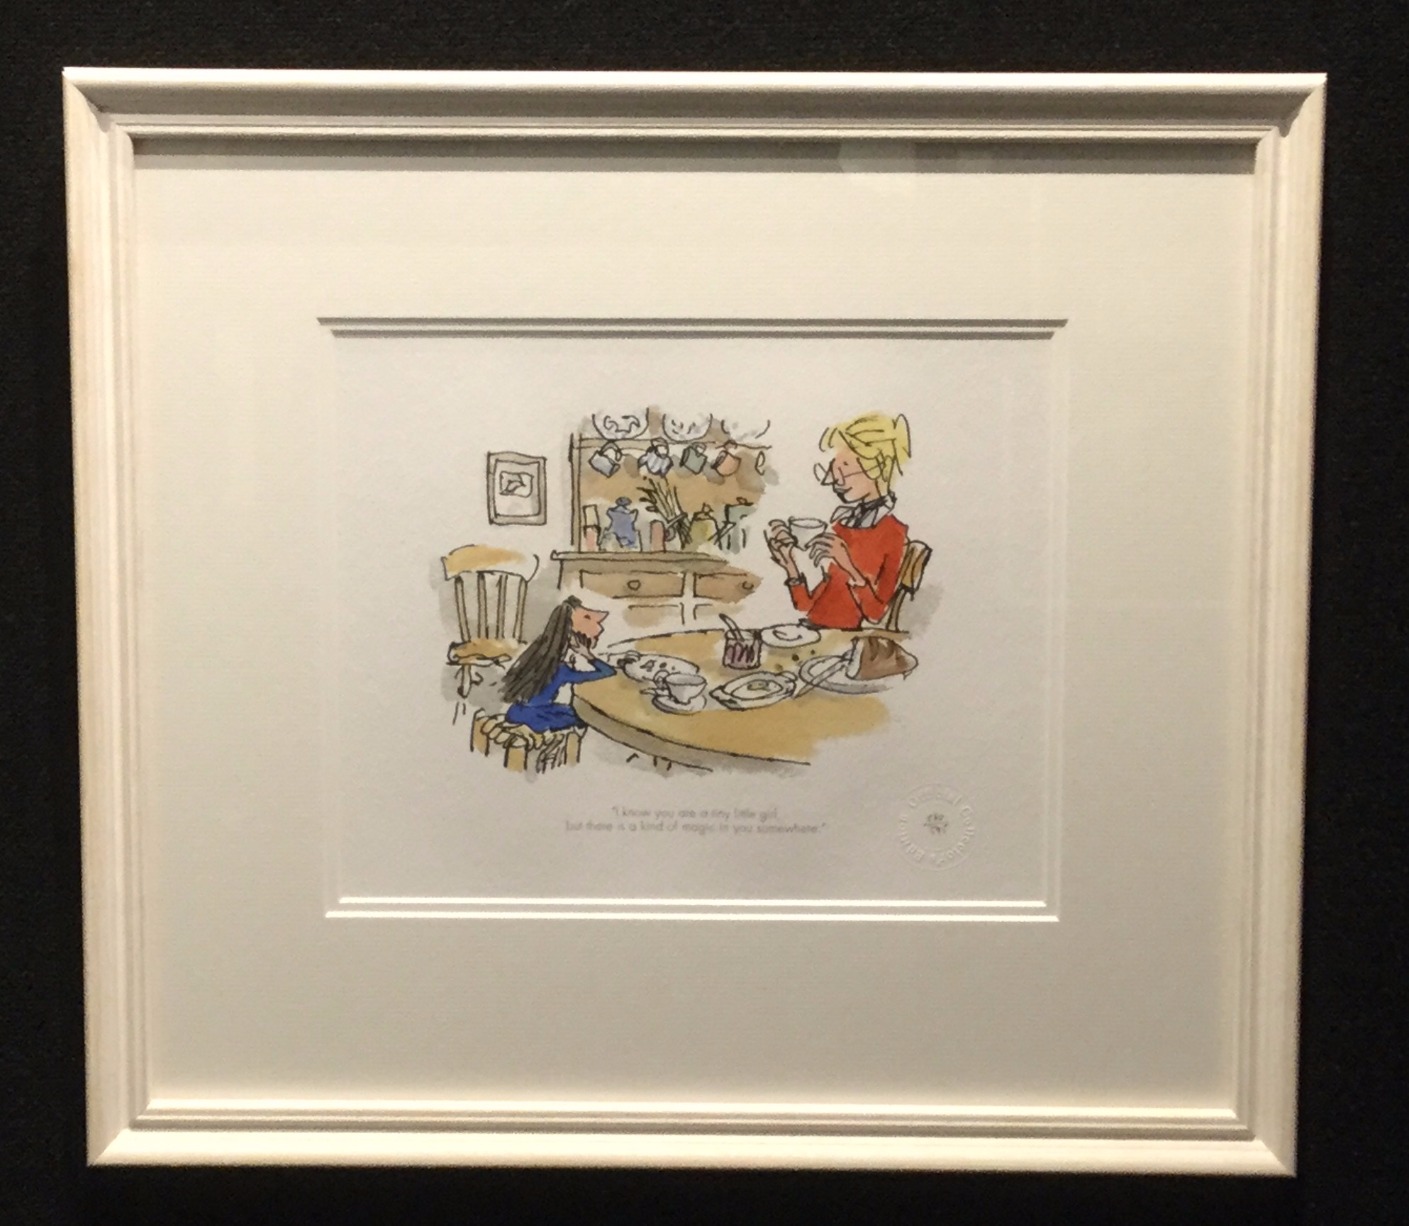 There is a Kind of Magic by Quentin Blake